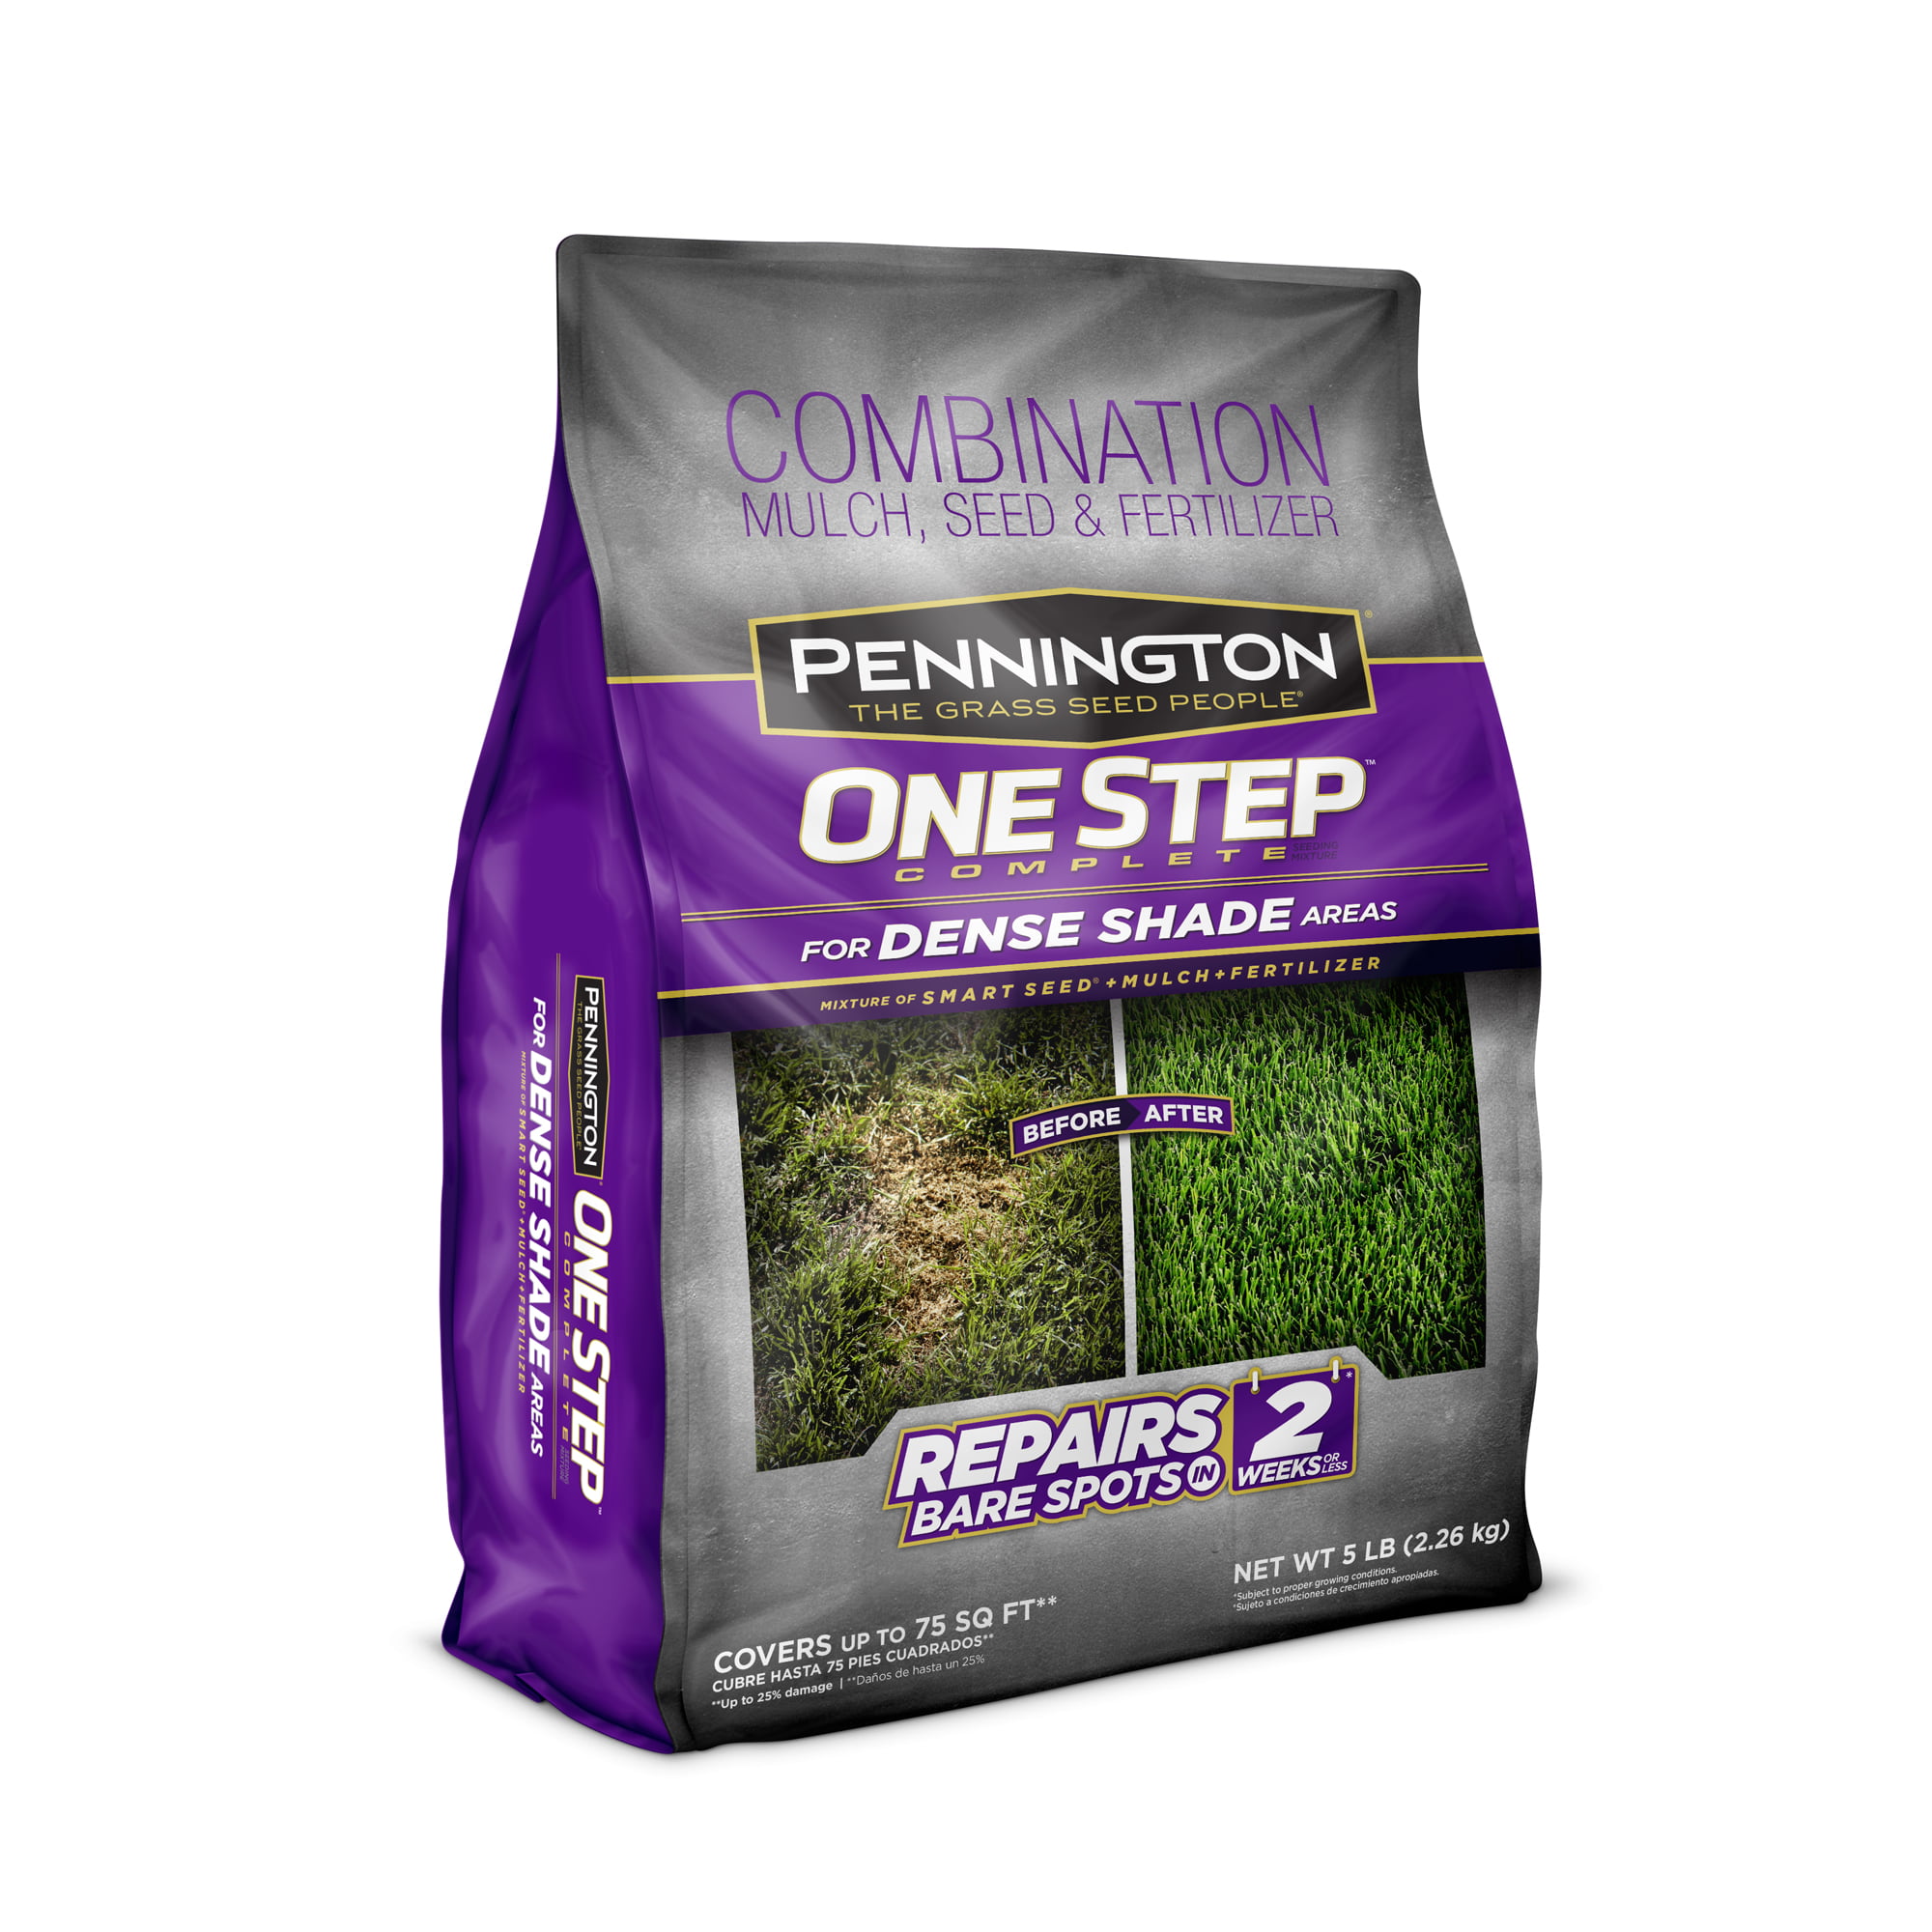 Pennington One Step Complete Dense Shade Grass Seed, Patch and Repair; 5 lb.